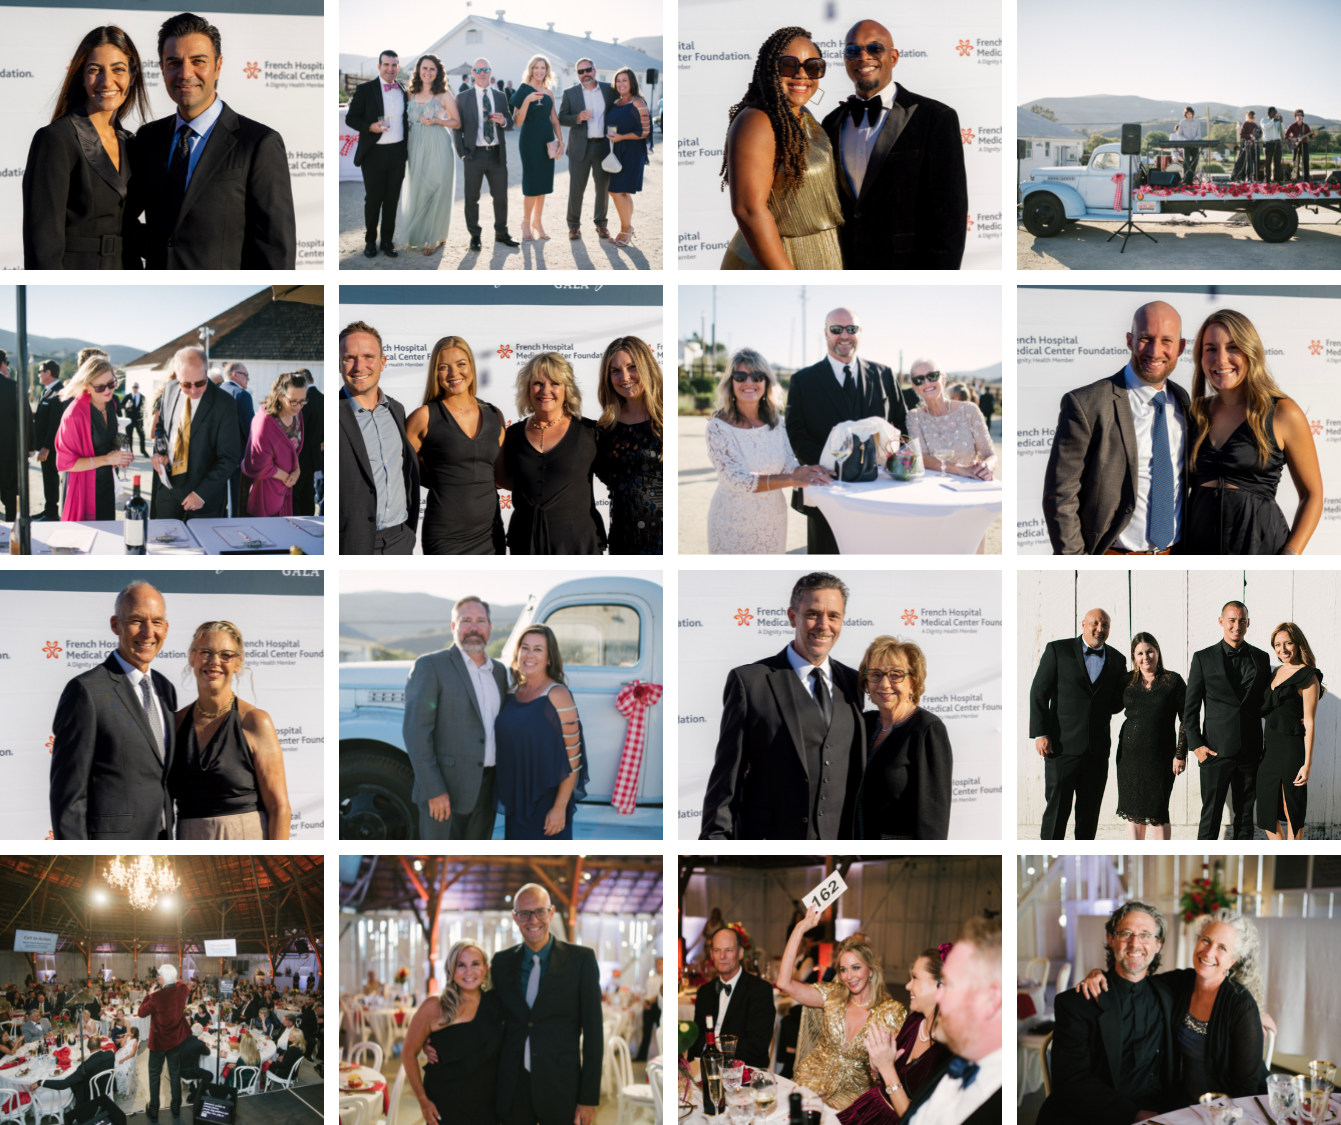 Collage of photo from the 2022 Gala showing guests and the event.